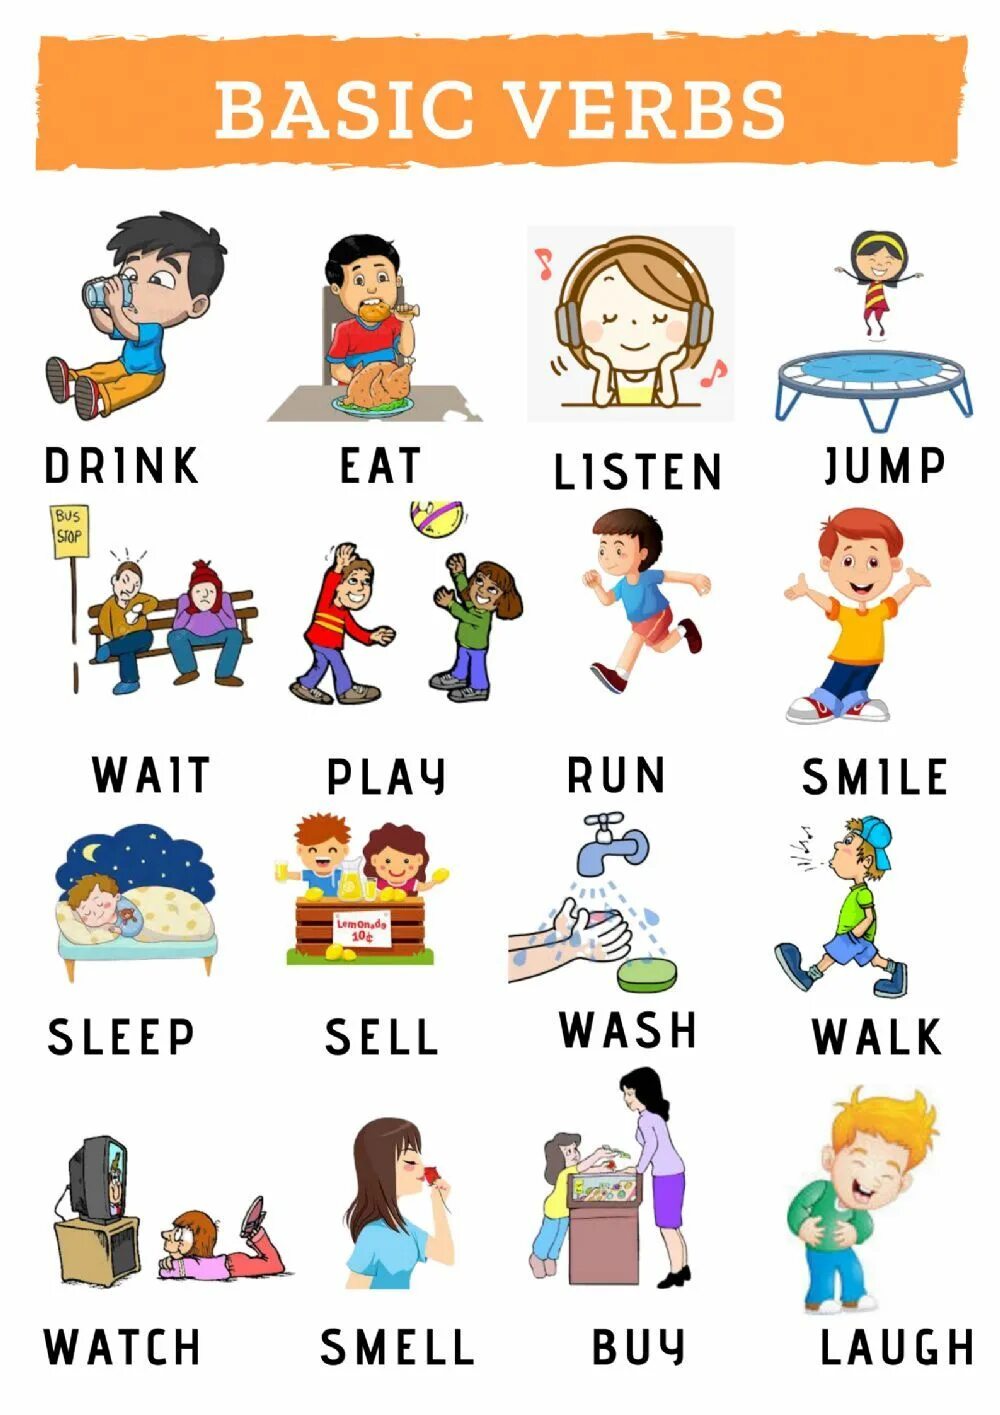 Basic verbs in English. Action verbs в английском. Глаголы действия на английском. Английский verbs for Kids. Common actions